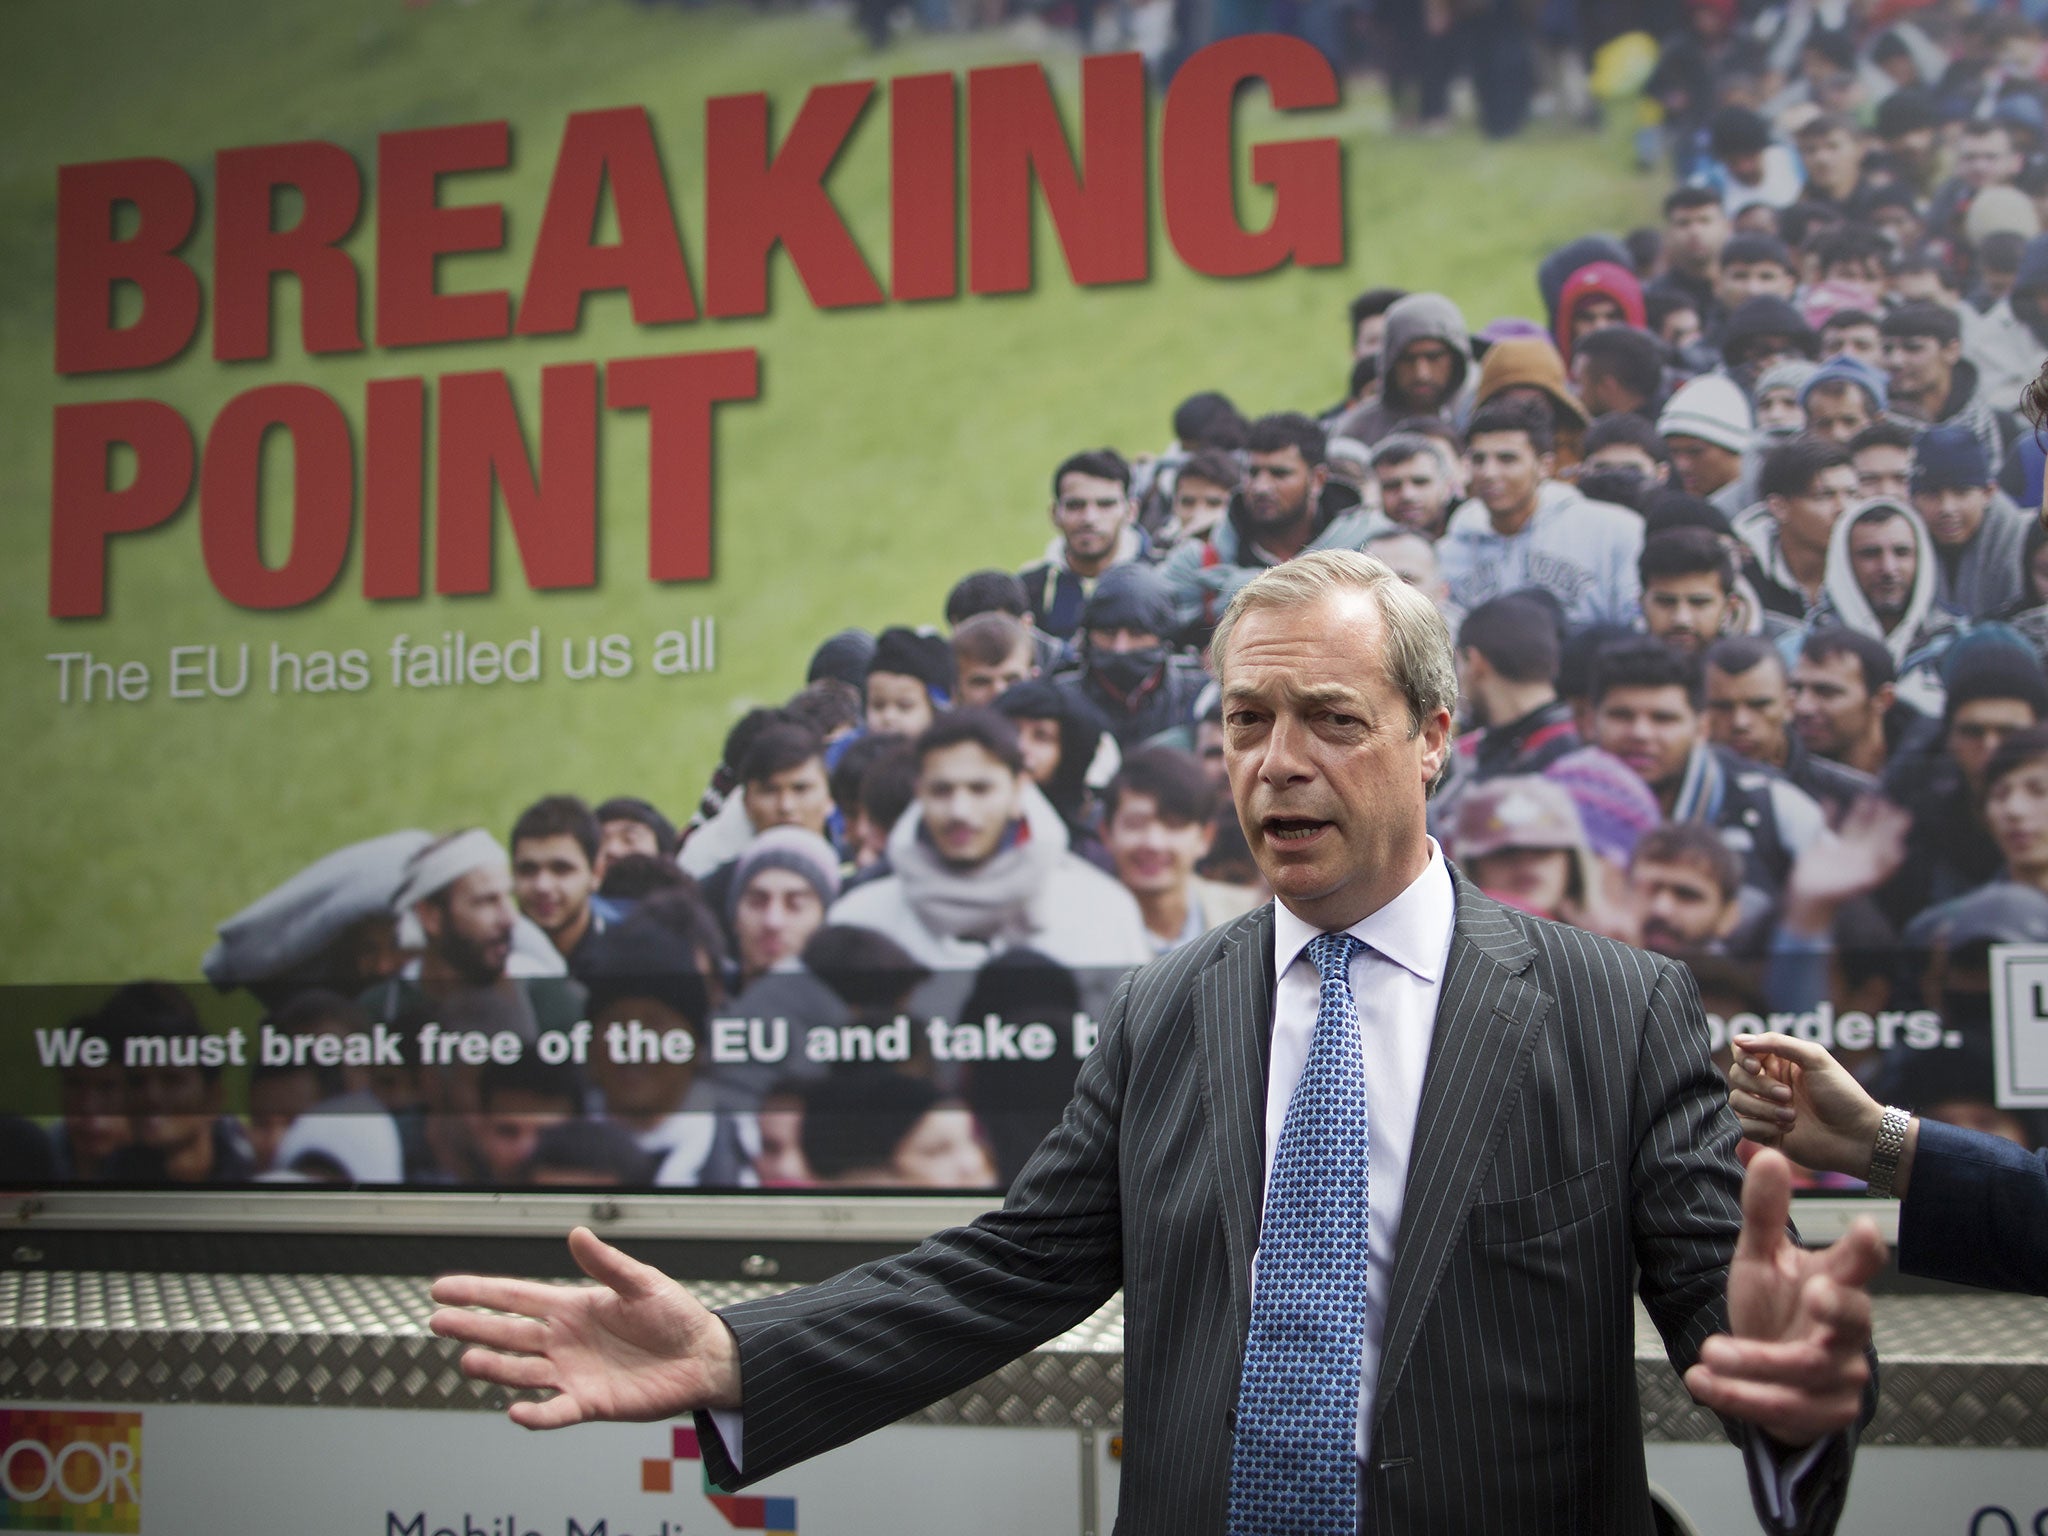 The pro-Brexit poster showing refugees queuing at the border between Croatia and Slovenia, which was launched by Nigel Farage, was compared to Nazi propaganda